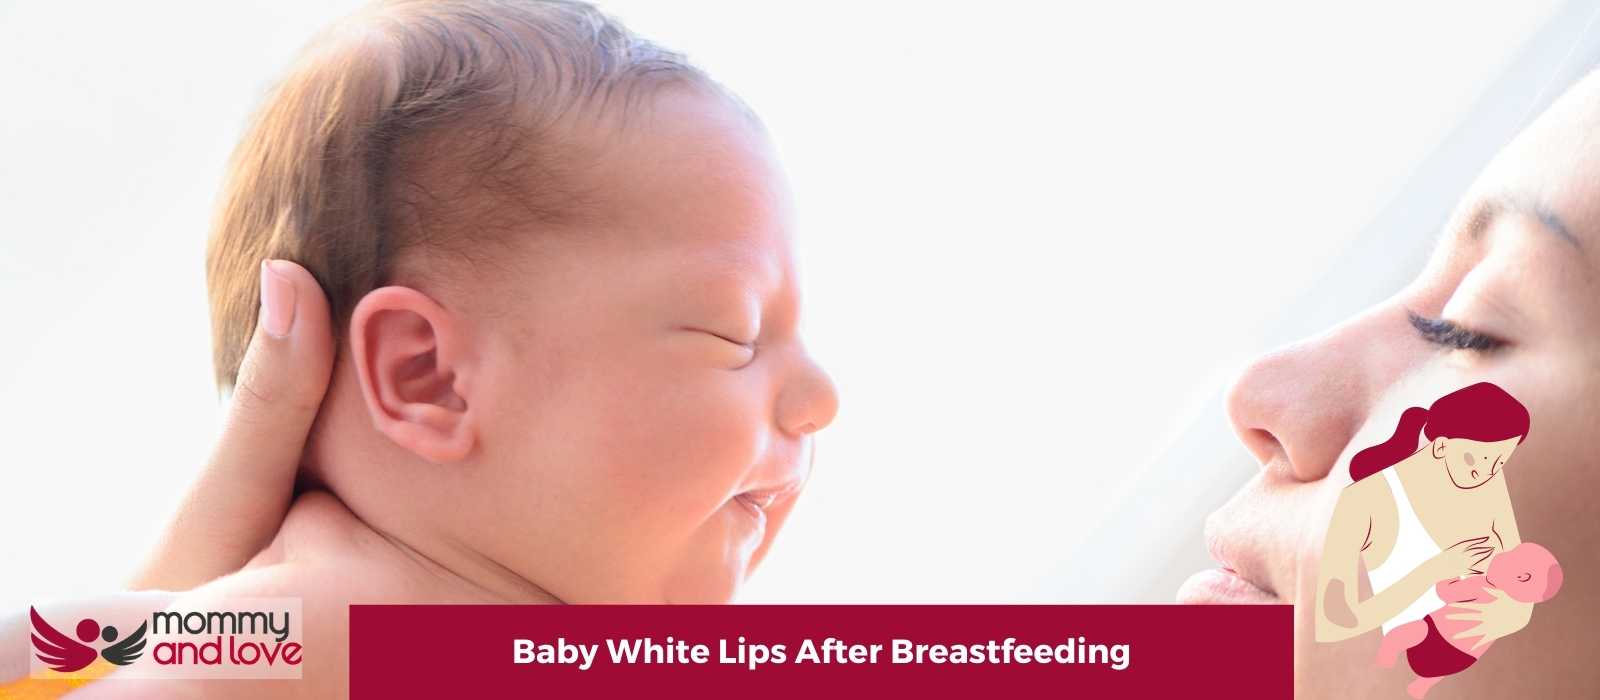 Baby White Lips After Breastfeeding